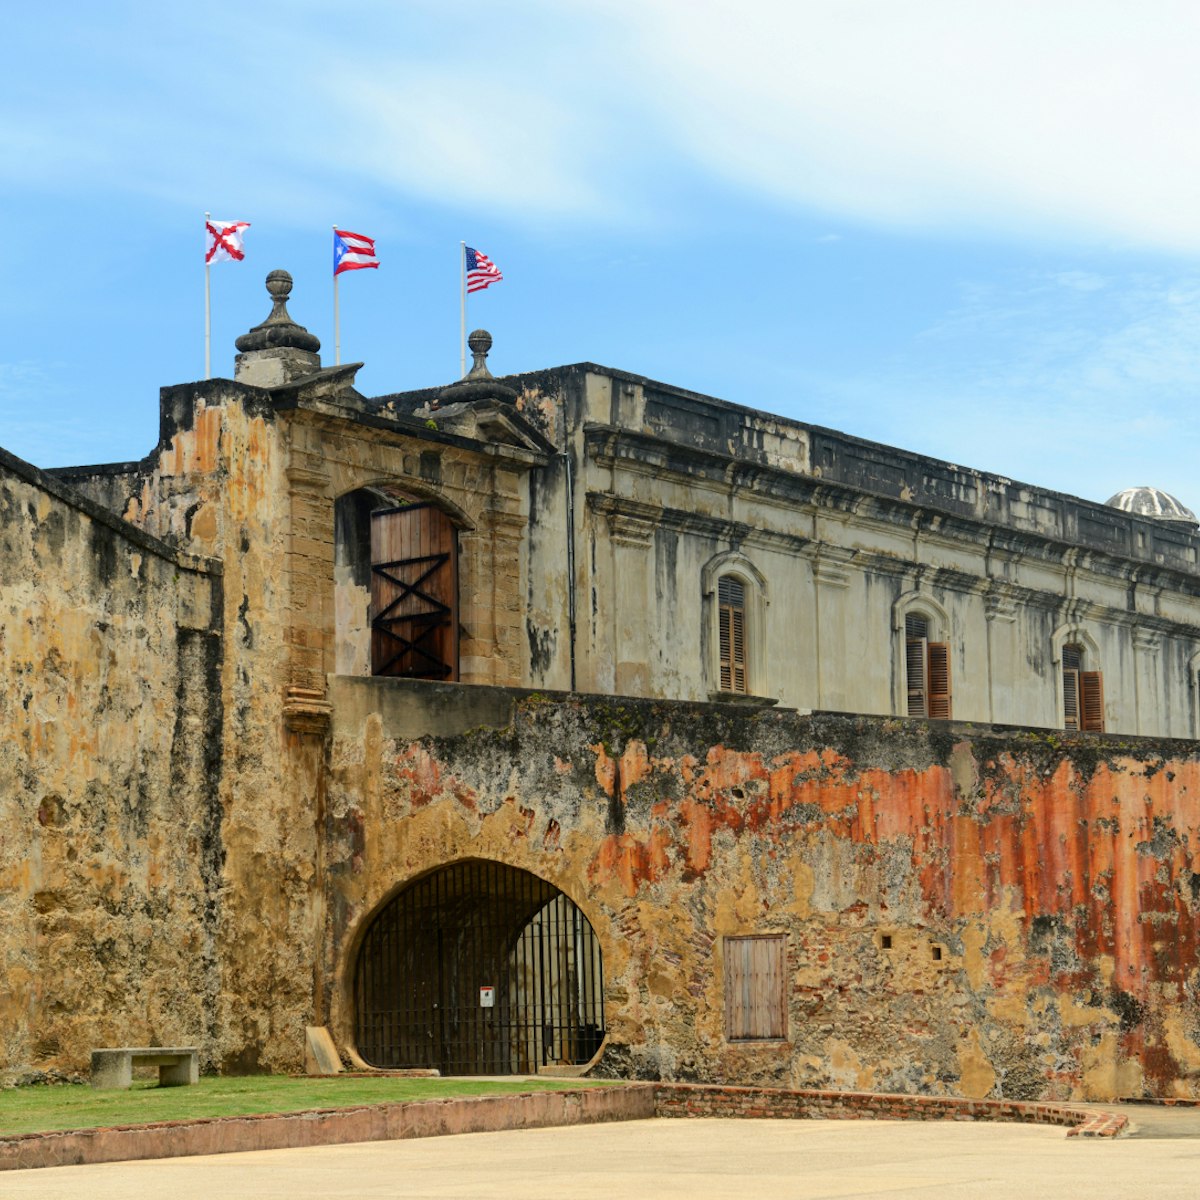 Castillo de San Cristobal, San Juan, Puerto Rico. Castillo de San Cristobal is designated as UNESCO World Heritage Site since 1983.; Shutterstock ID 267998555; Your name (First / Last): Josh Vogel; GL account no.: 56530; Netsuite department name: Online Design; Full Product or Project name including edition: Digital Content/Sights